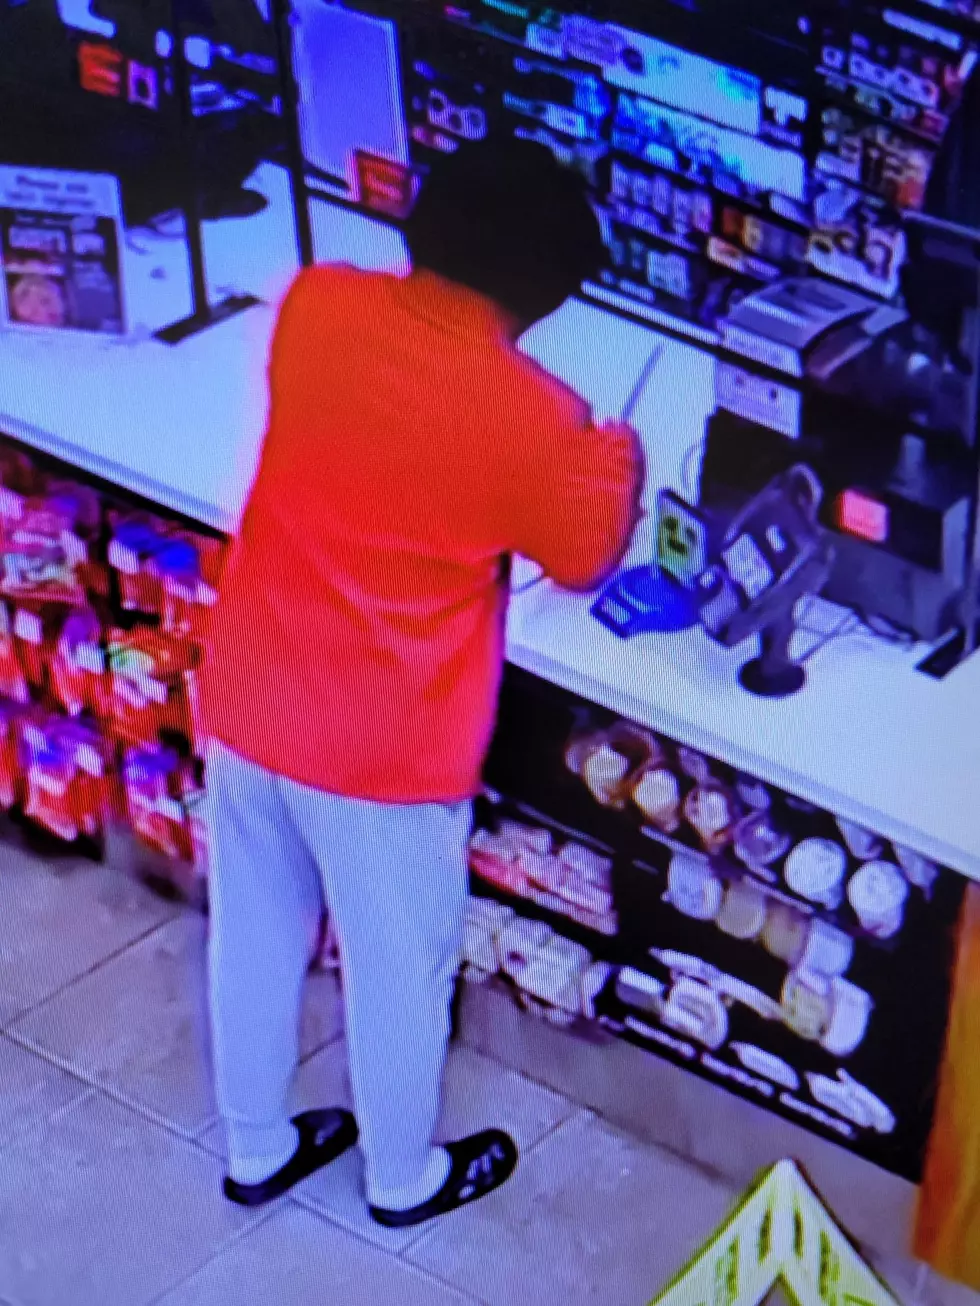 Man With &#8216;Large Knife&#8217; Robs Rochester Convenience Store [UPDATED]